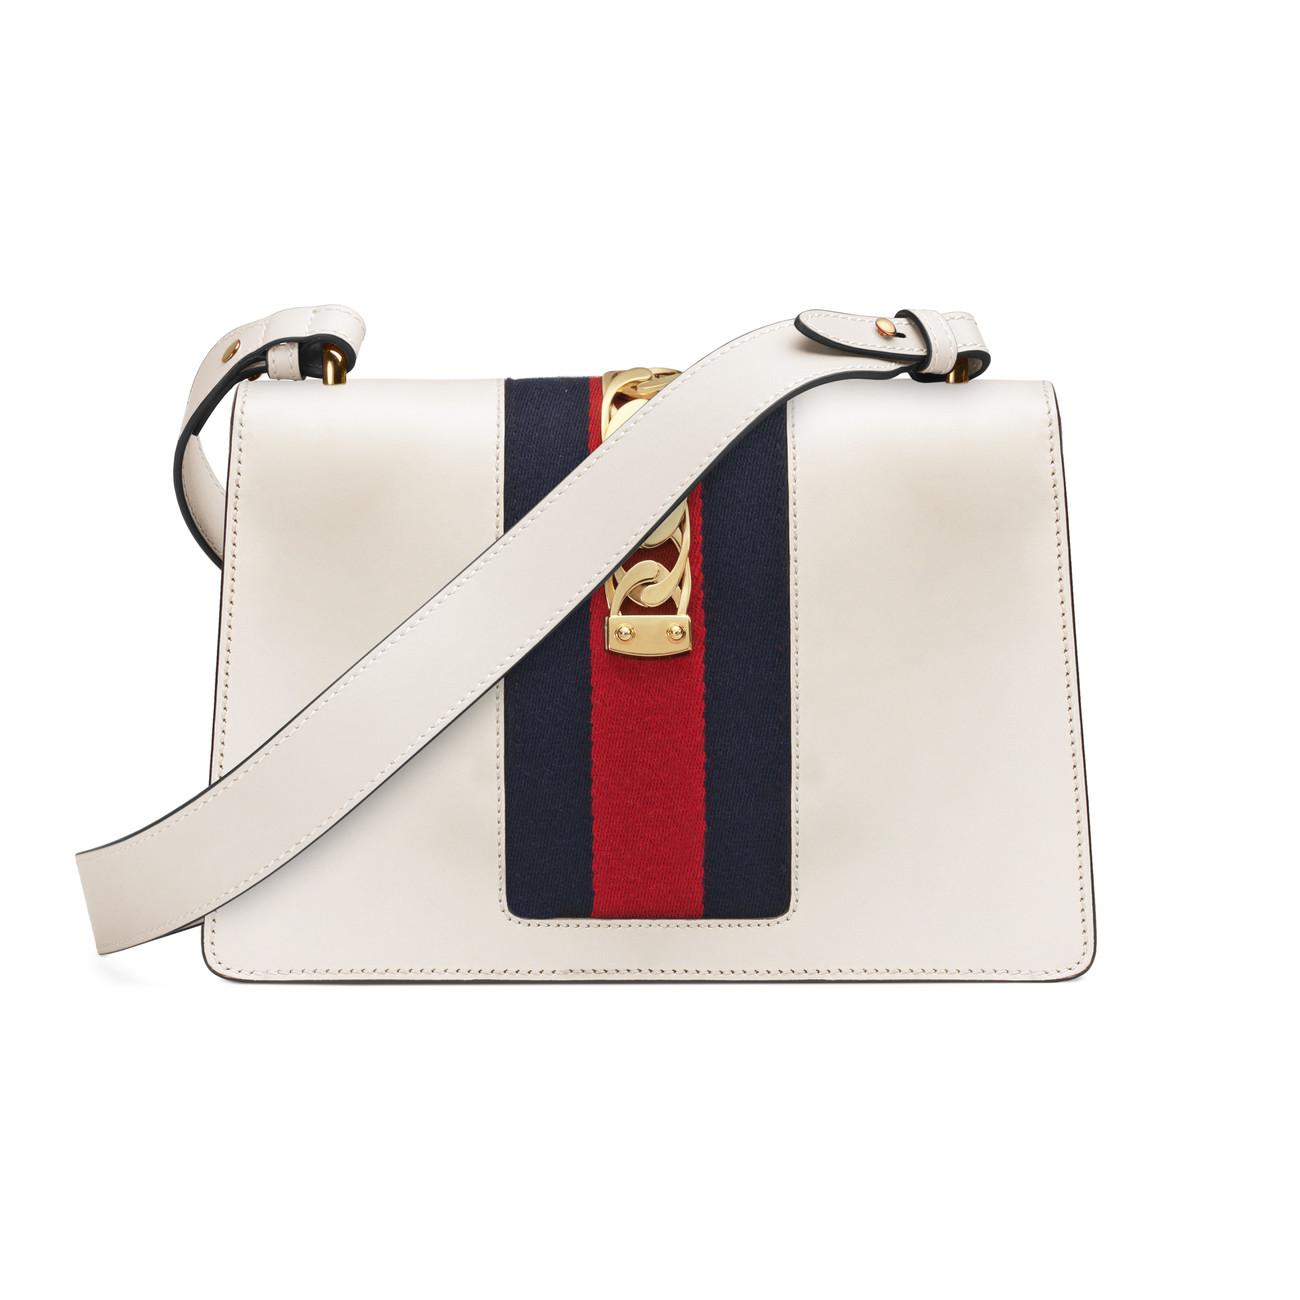 Gucci Leather Sylvie Small Shoulder Bag in White - Lyst